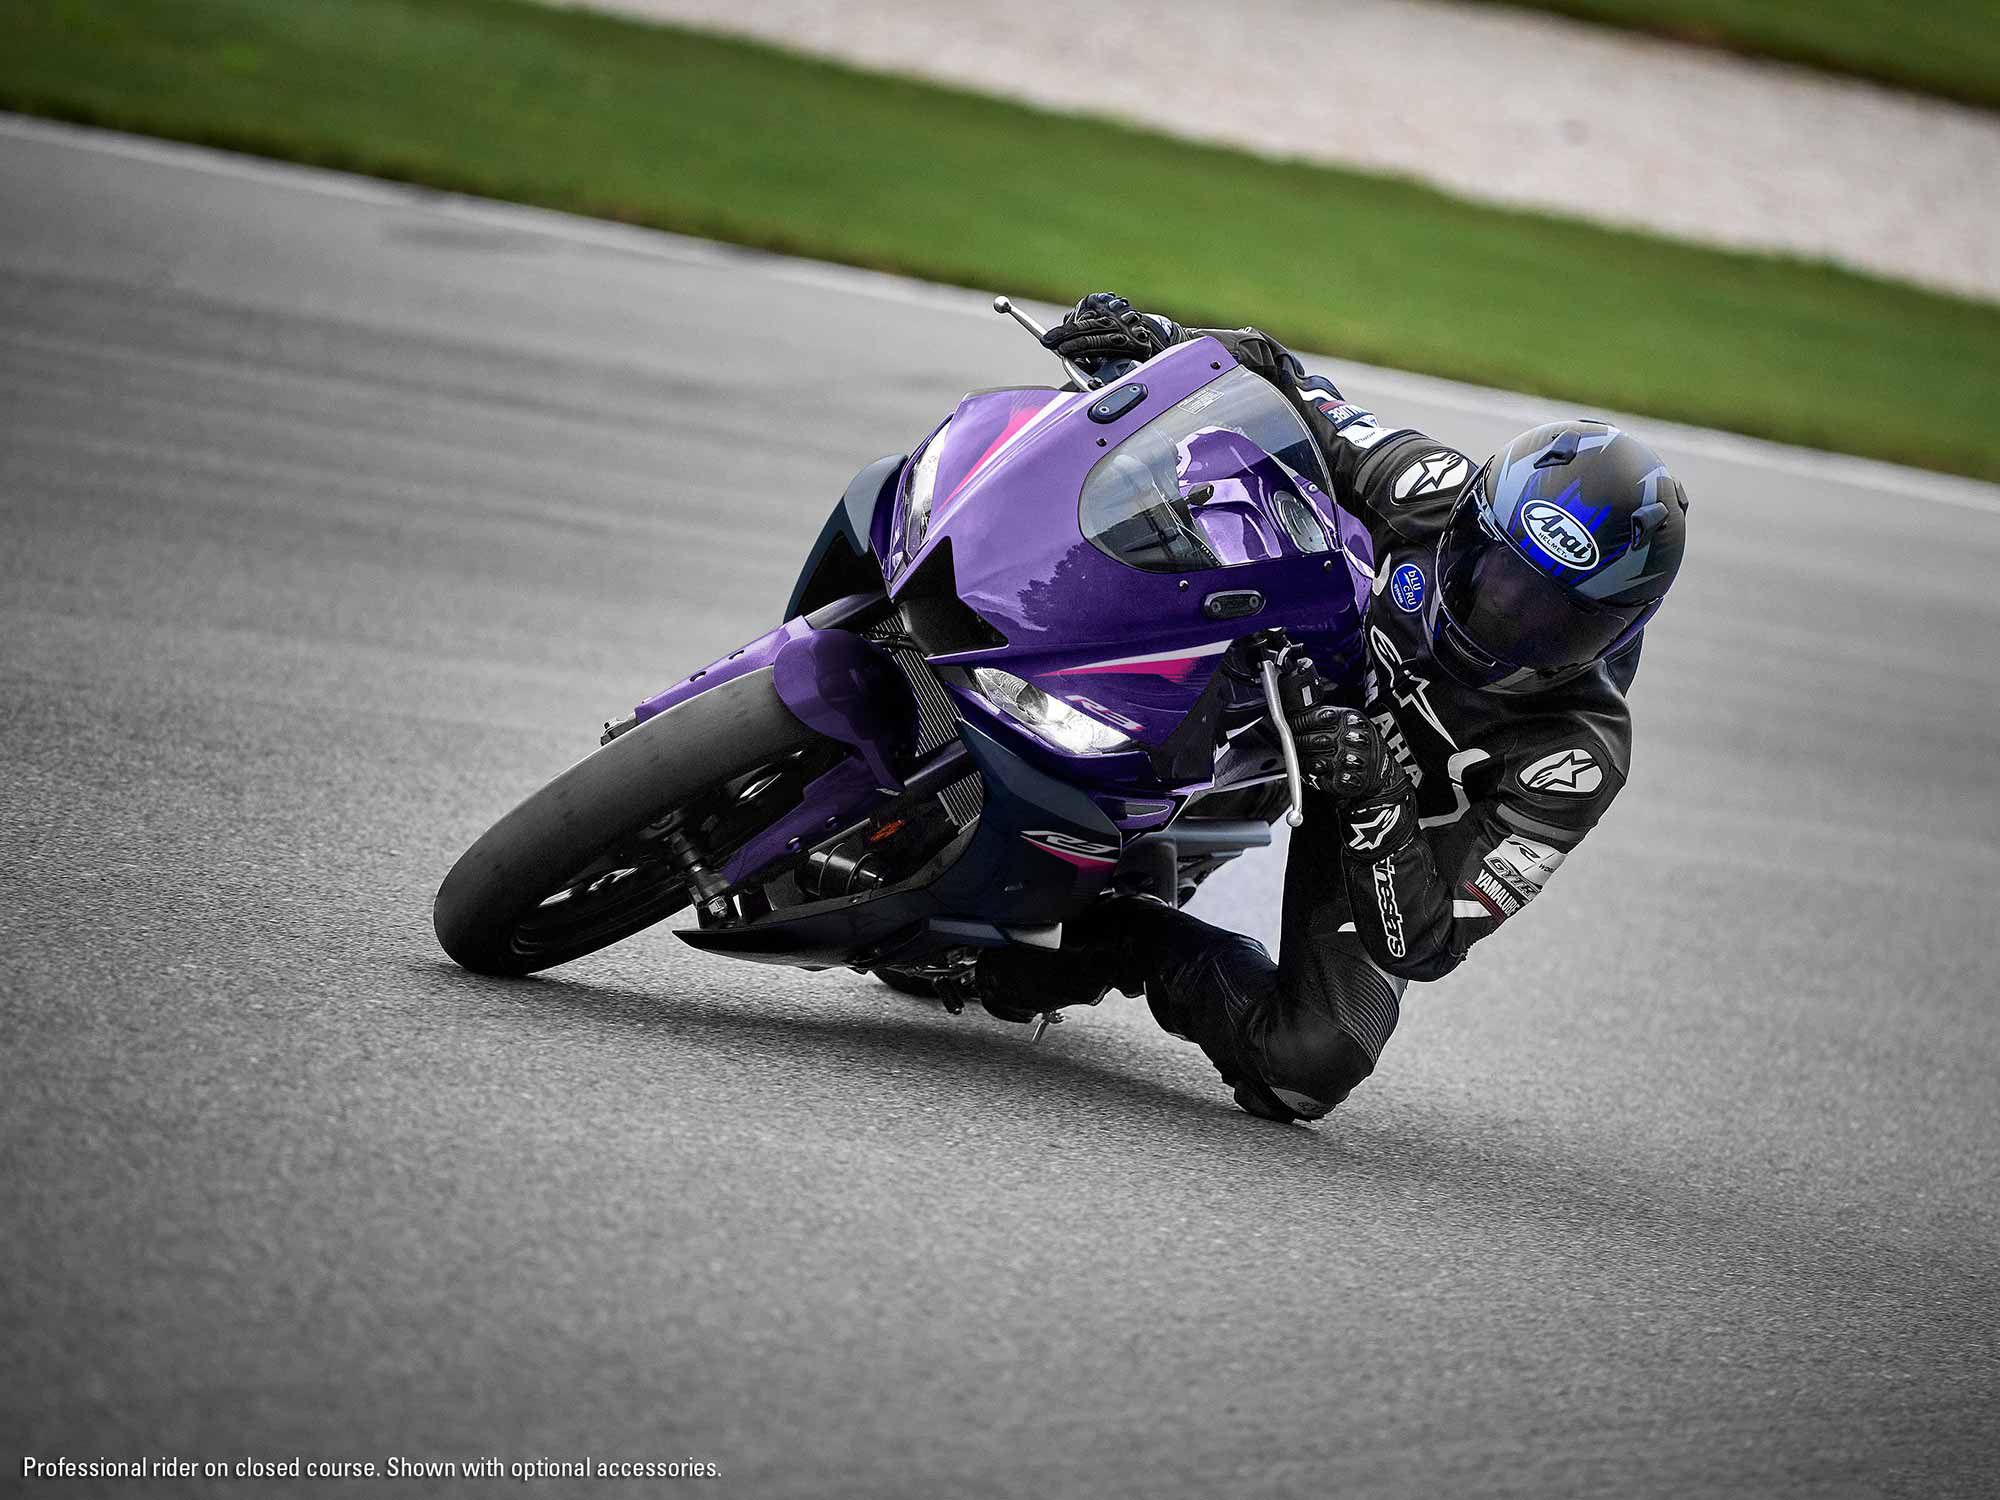 The Tuning Fork company’s 2023 YZF-R3 sports a new color.